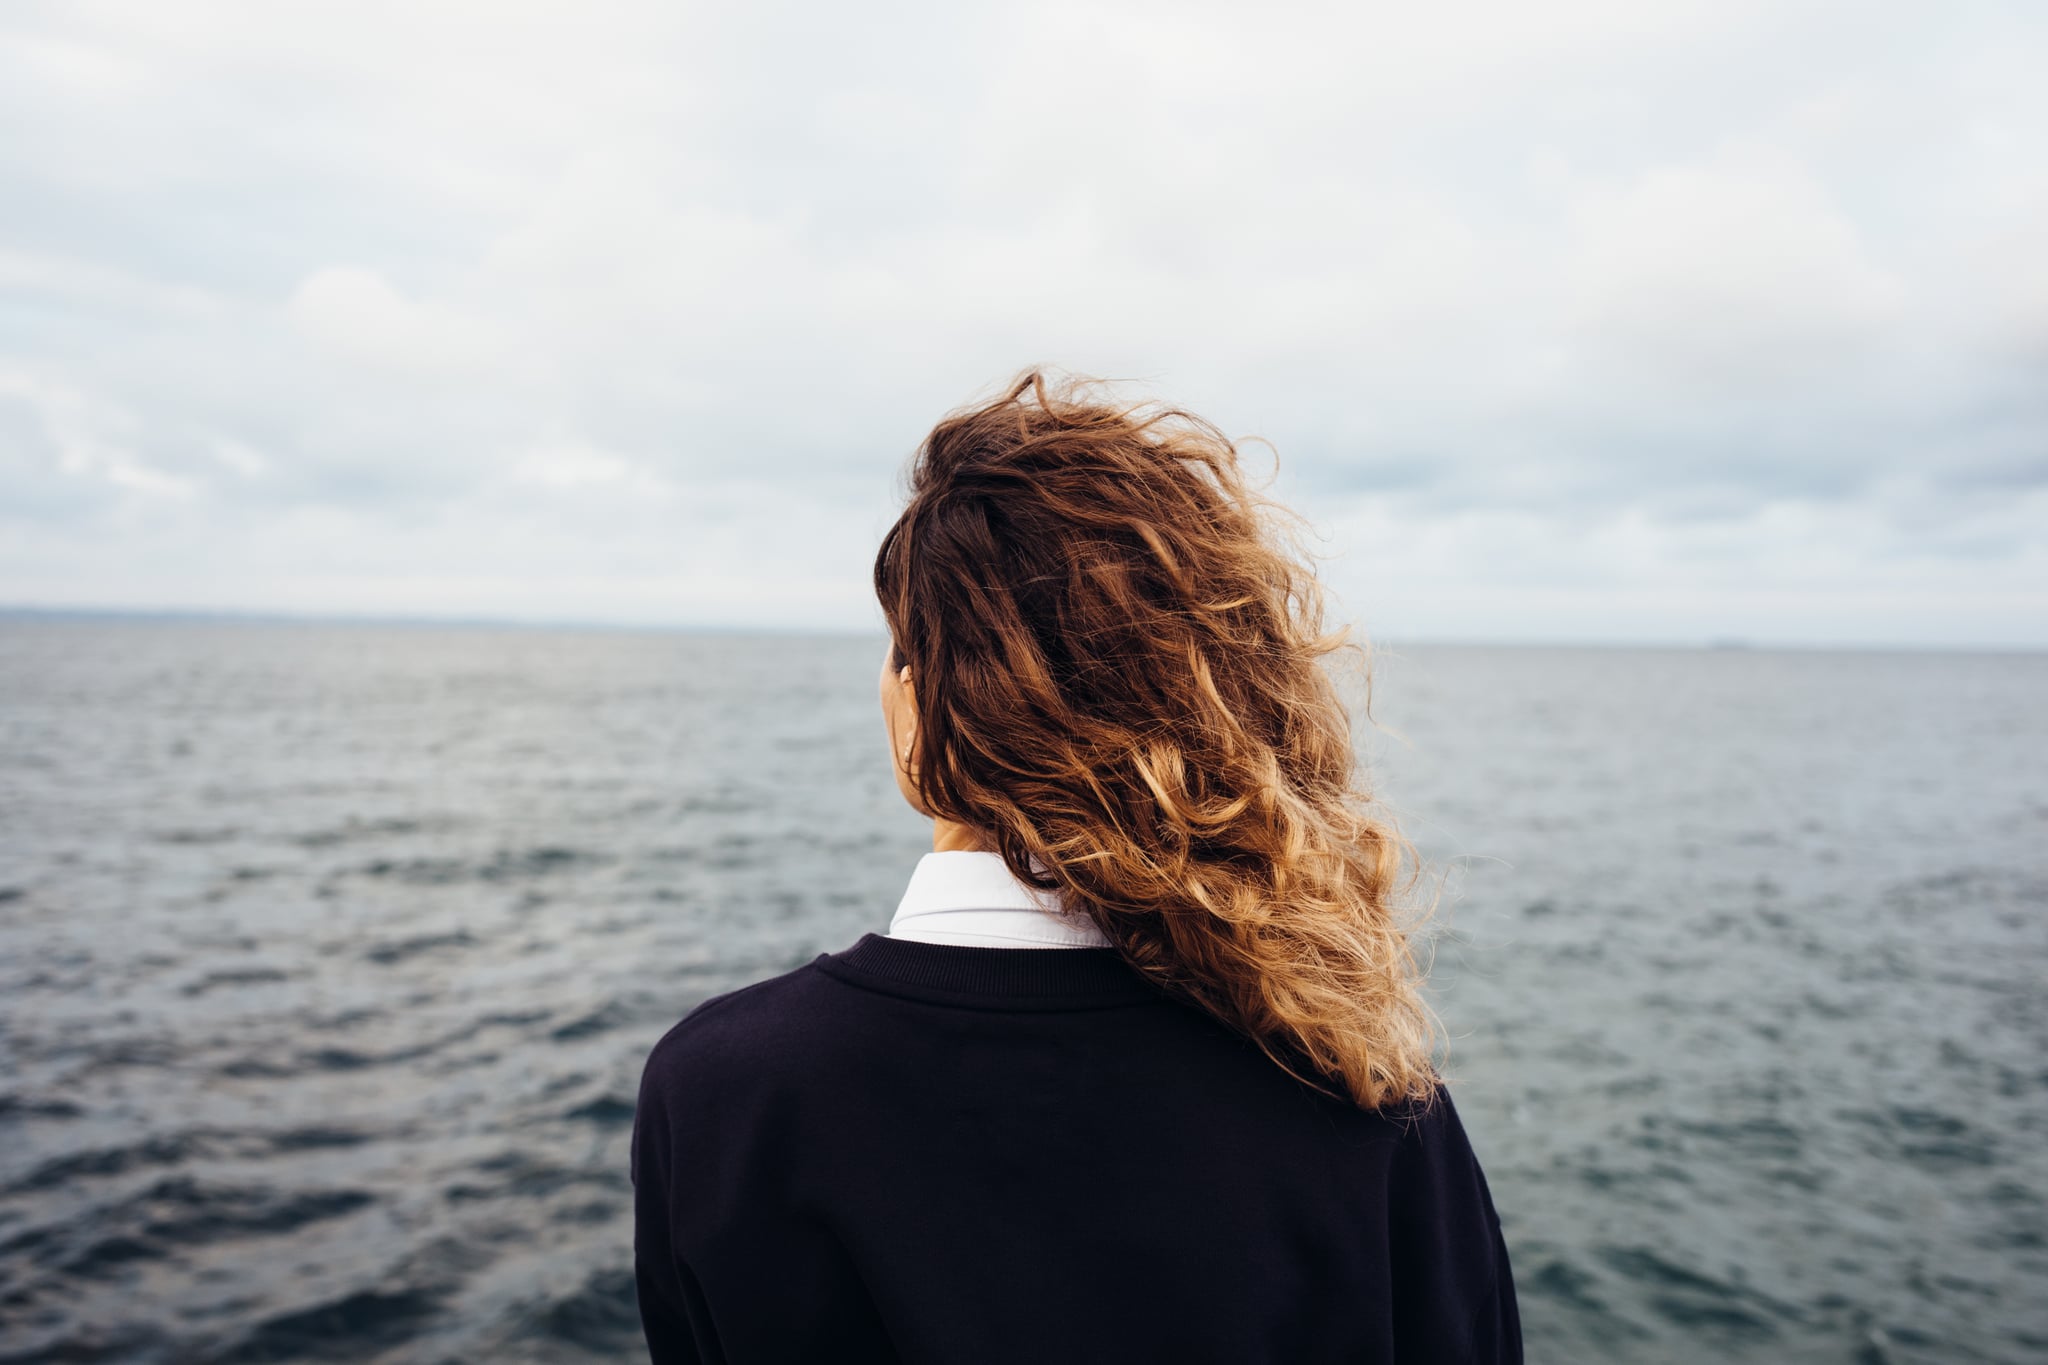 Rear view of young woman looking at overcast sky and grey sea. Female with red curly hair standing alone thinking at the background of seascape.